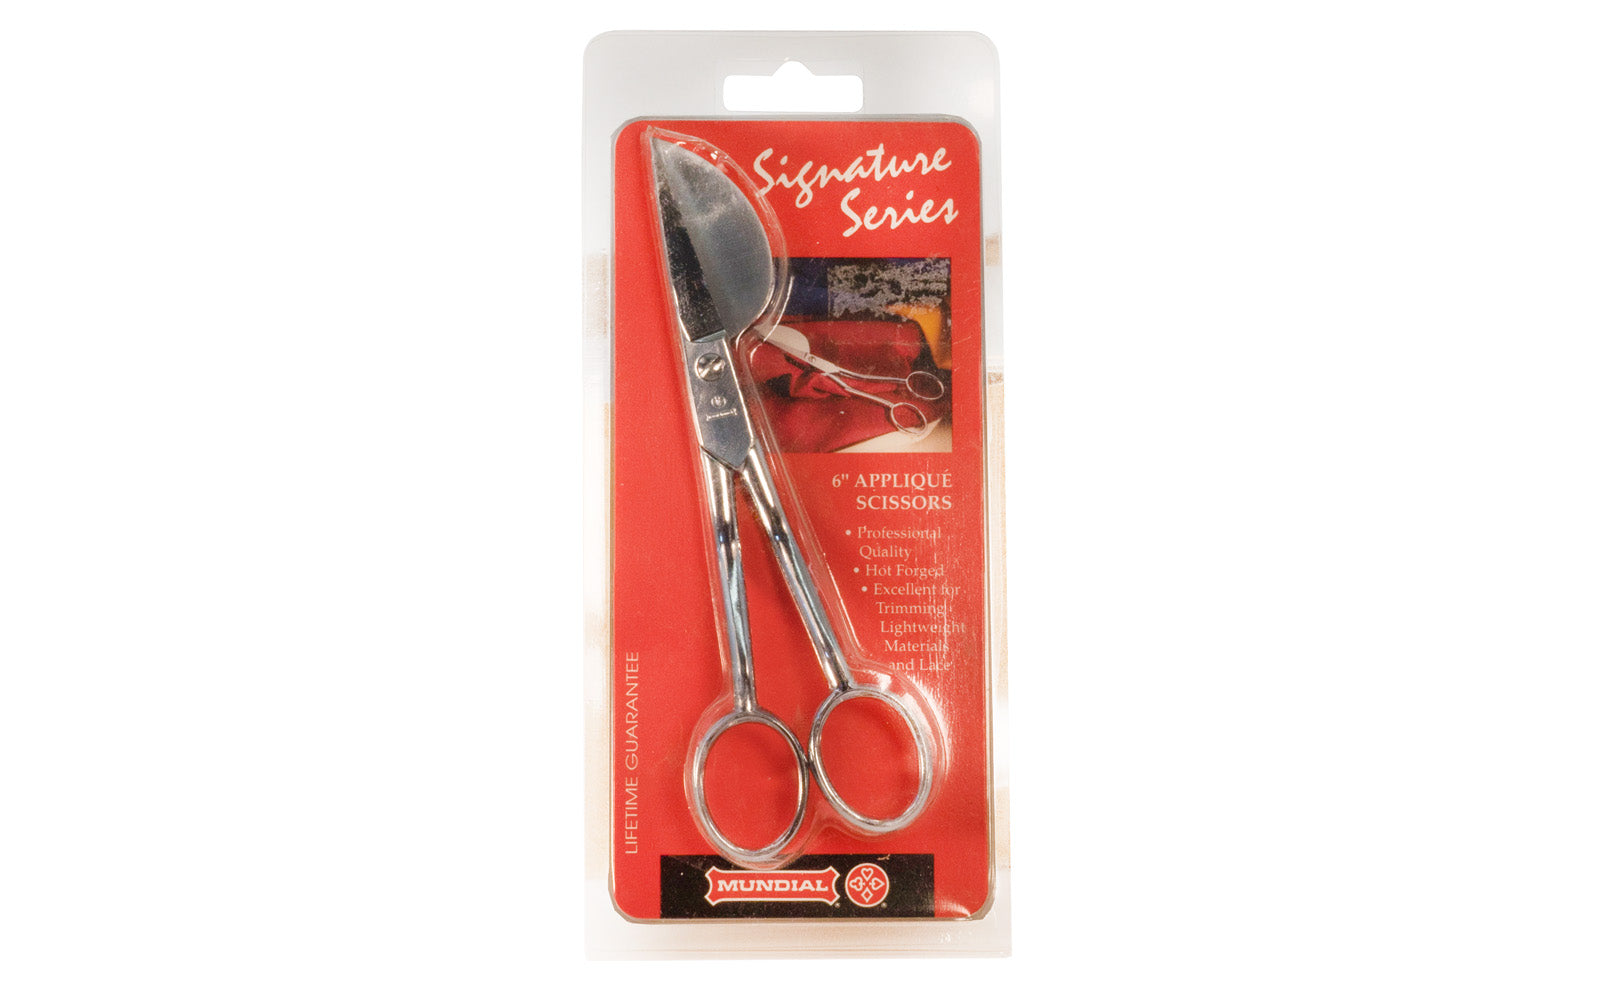 Mundial 6" Applique Scissors. Hot forged professional quality. Excellent for trimming & lightweight materials & lace, etc. Item No. 585. Made in Brazil. 049774058565